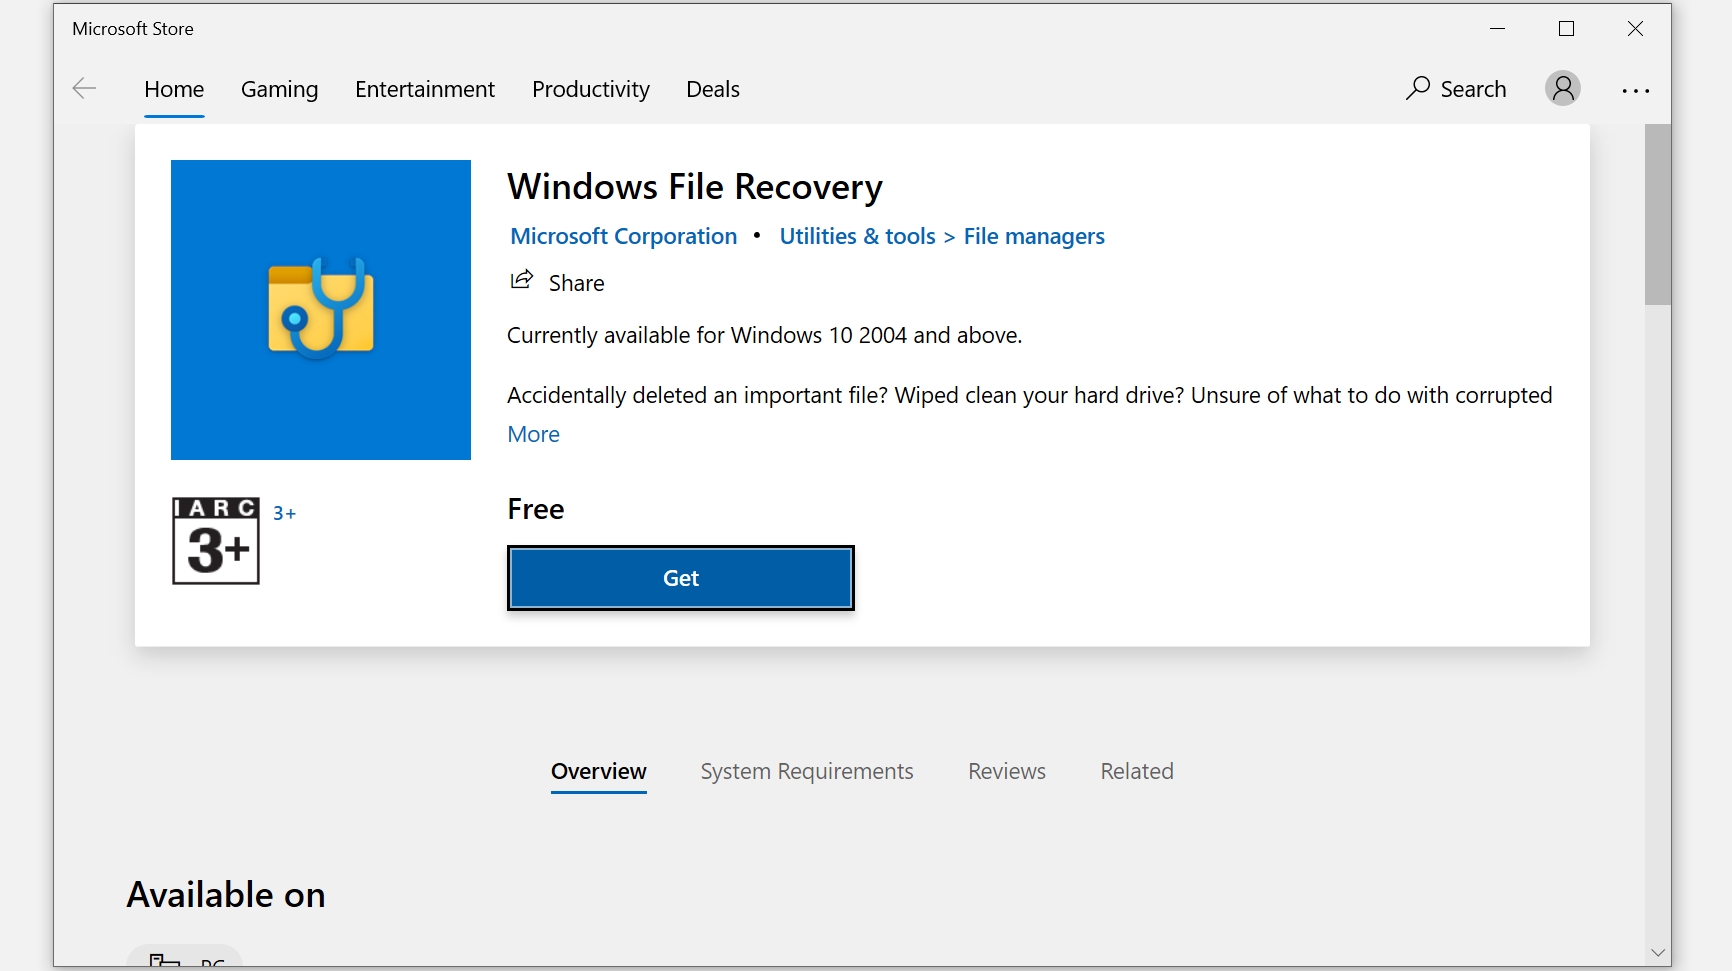 Windows File Recovery tool download page on the Microsoft Store.